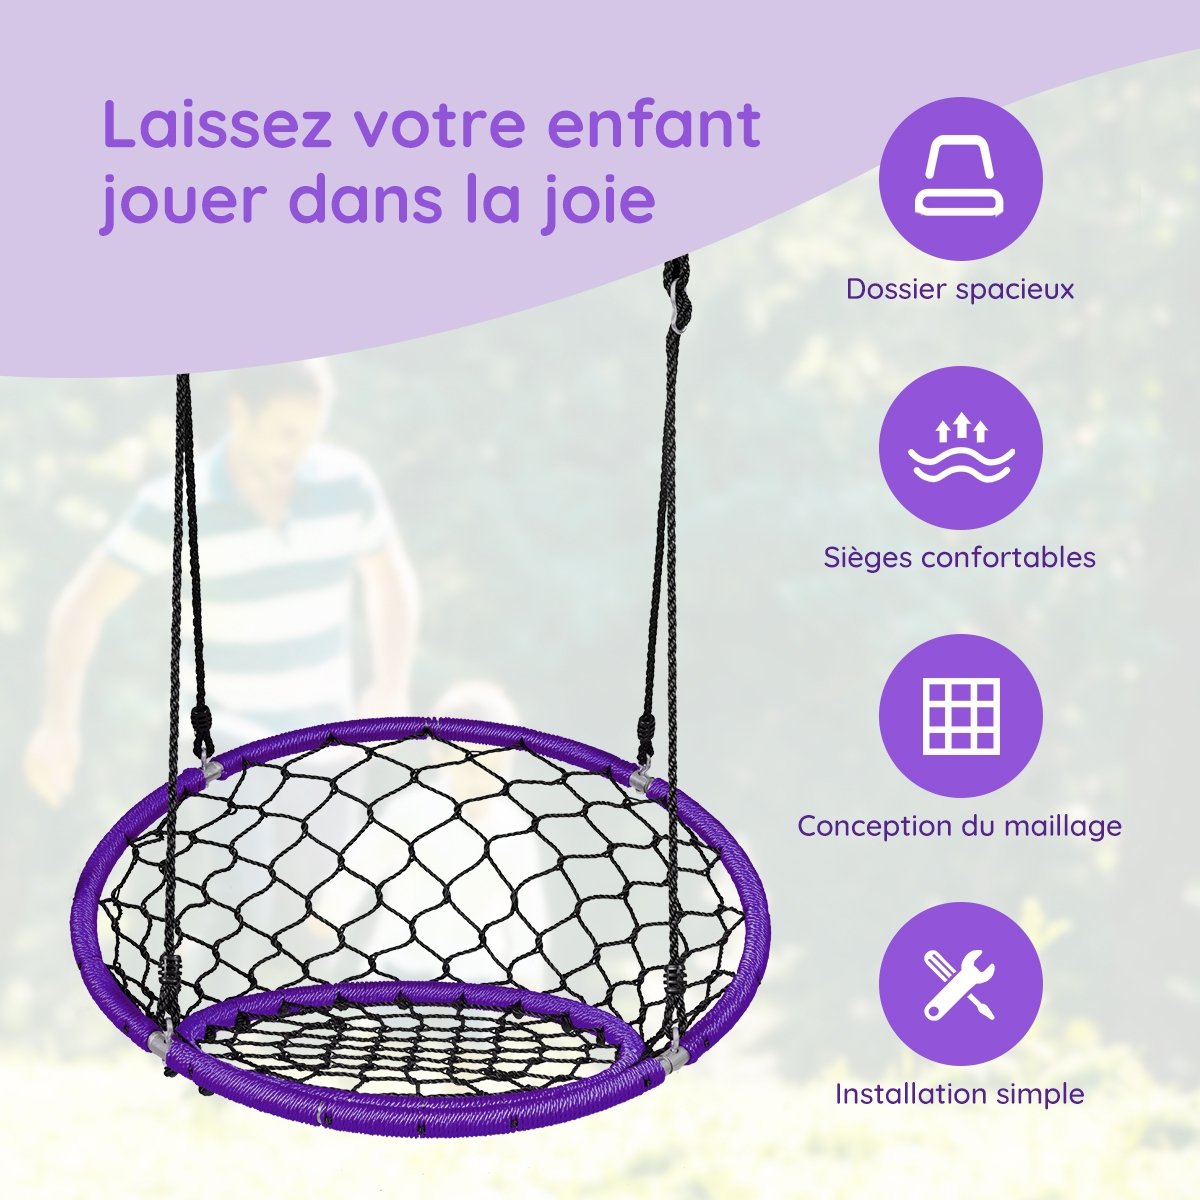 Net Hanging Swing Chair with Adjustable Hanging Ropes, Purple at Gallery Canada